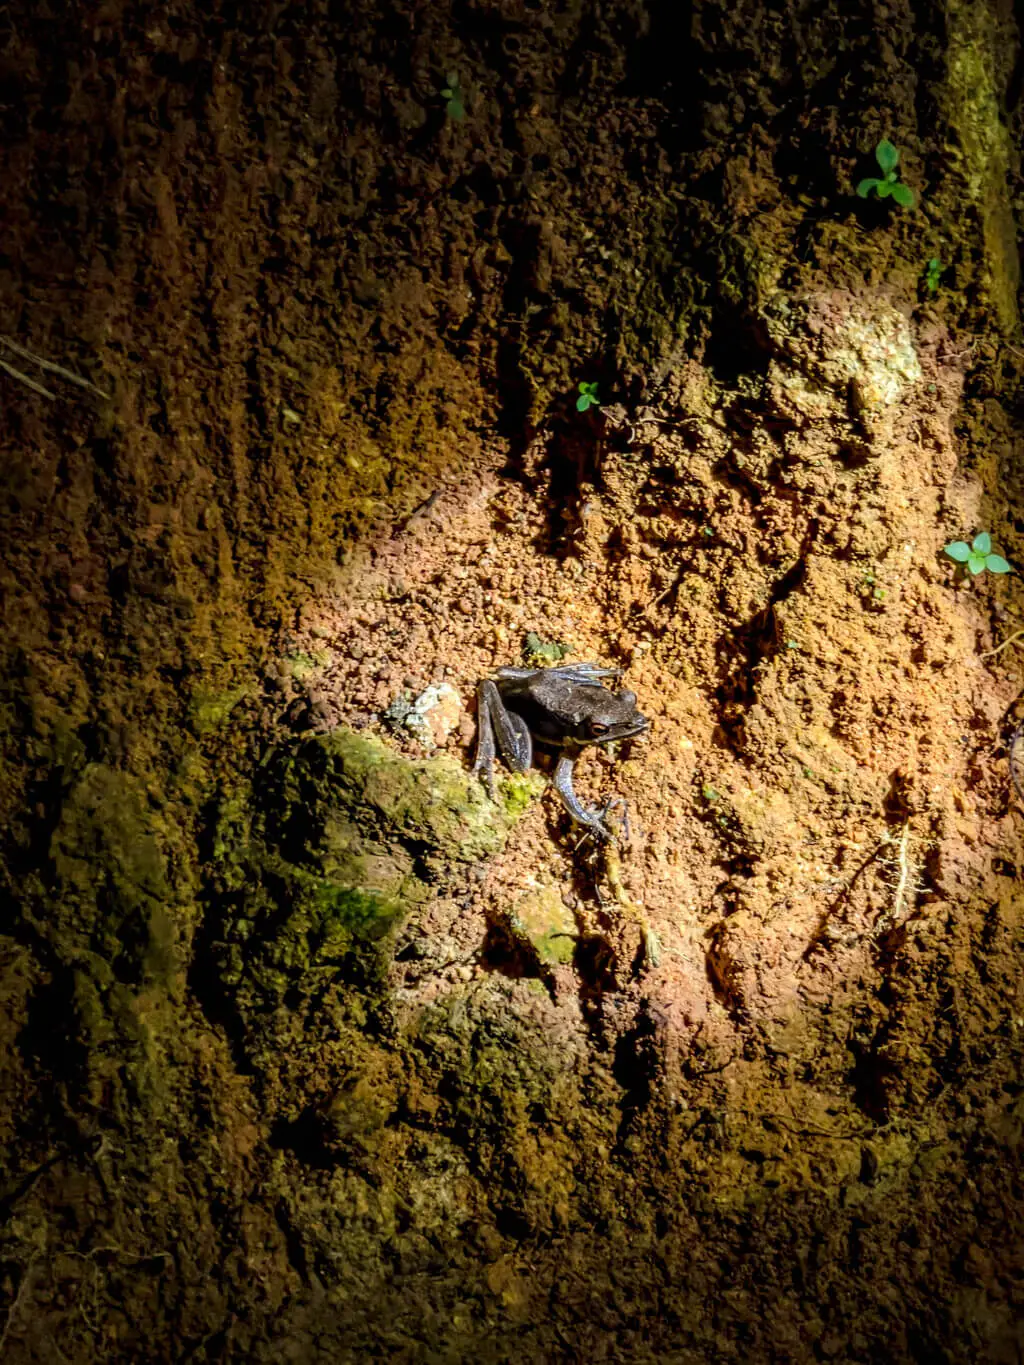 another frog from night safari khao sok national park thailand - laugh travel eat